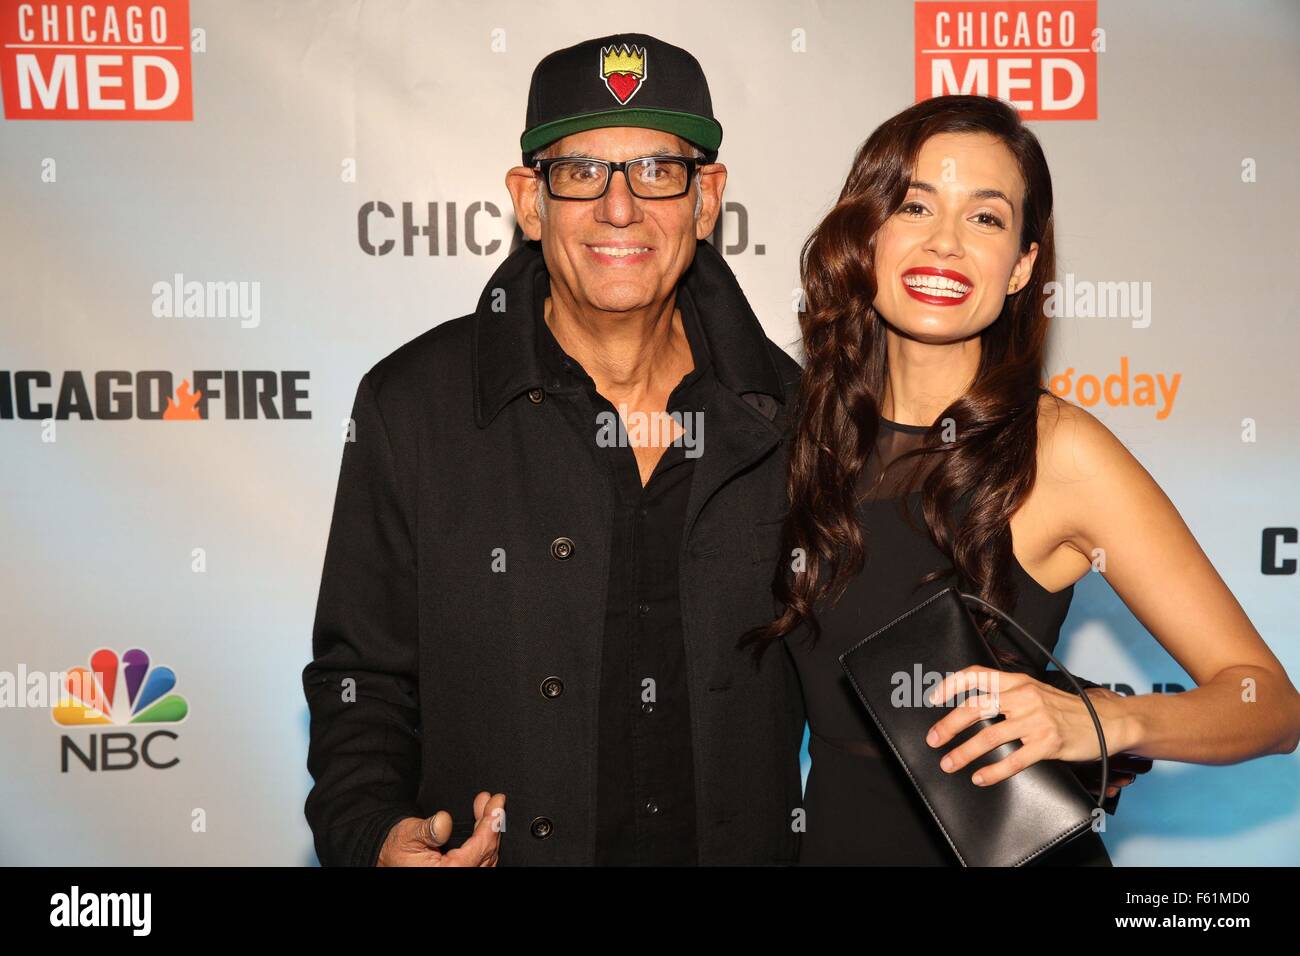 Chicago, Illinois, USA. 9th Nov, 2015. Drummer LIBERTY DEVITTO and actress daughter TORREY DEVITTO of 'Chicago Med' attends the NBC season launch in Chicago. © Mary Carol Fitzgerald Photograph/Globe Photos/ZUMA Wire/Alamy Live News Stock Photo